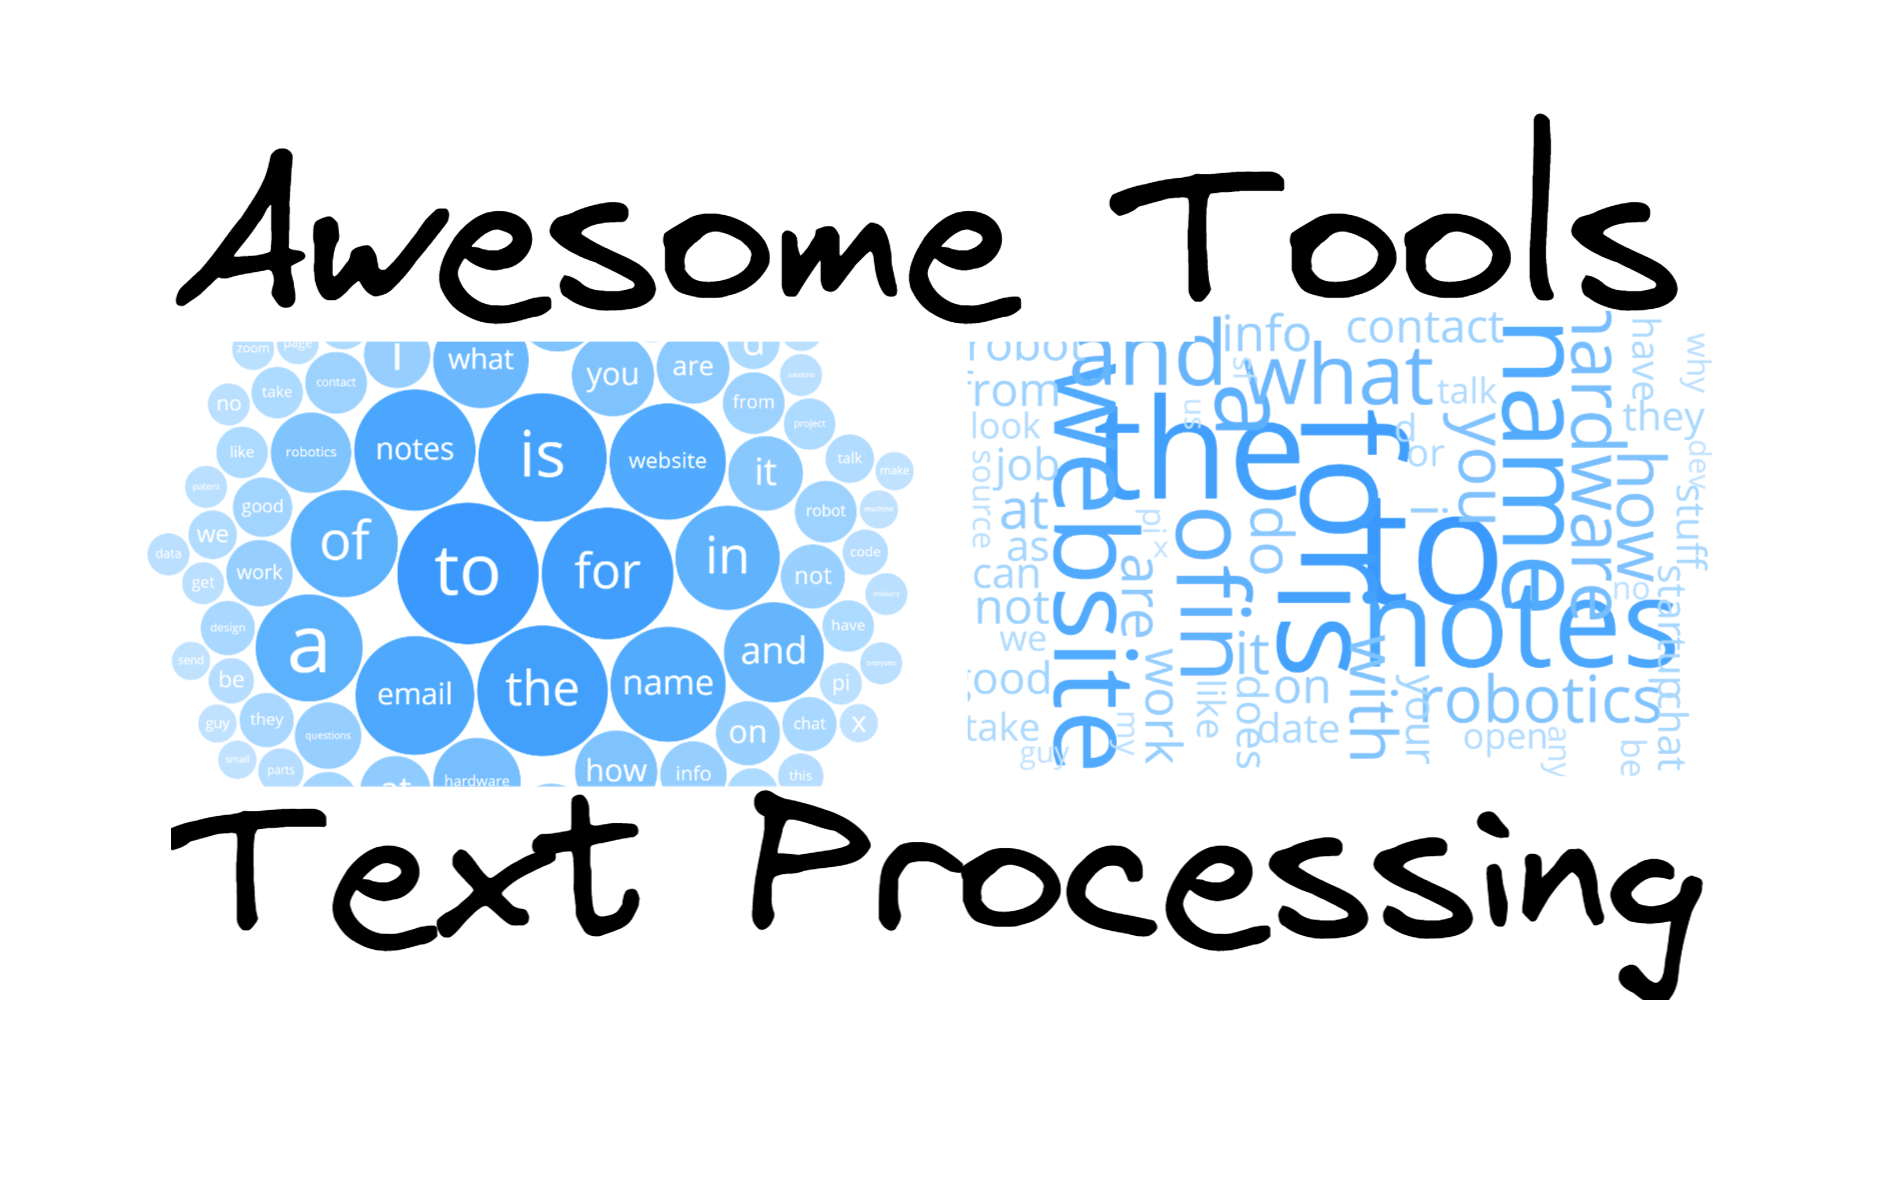 5 Awesome Text Processing Tools (online)